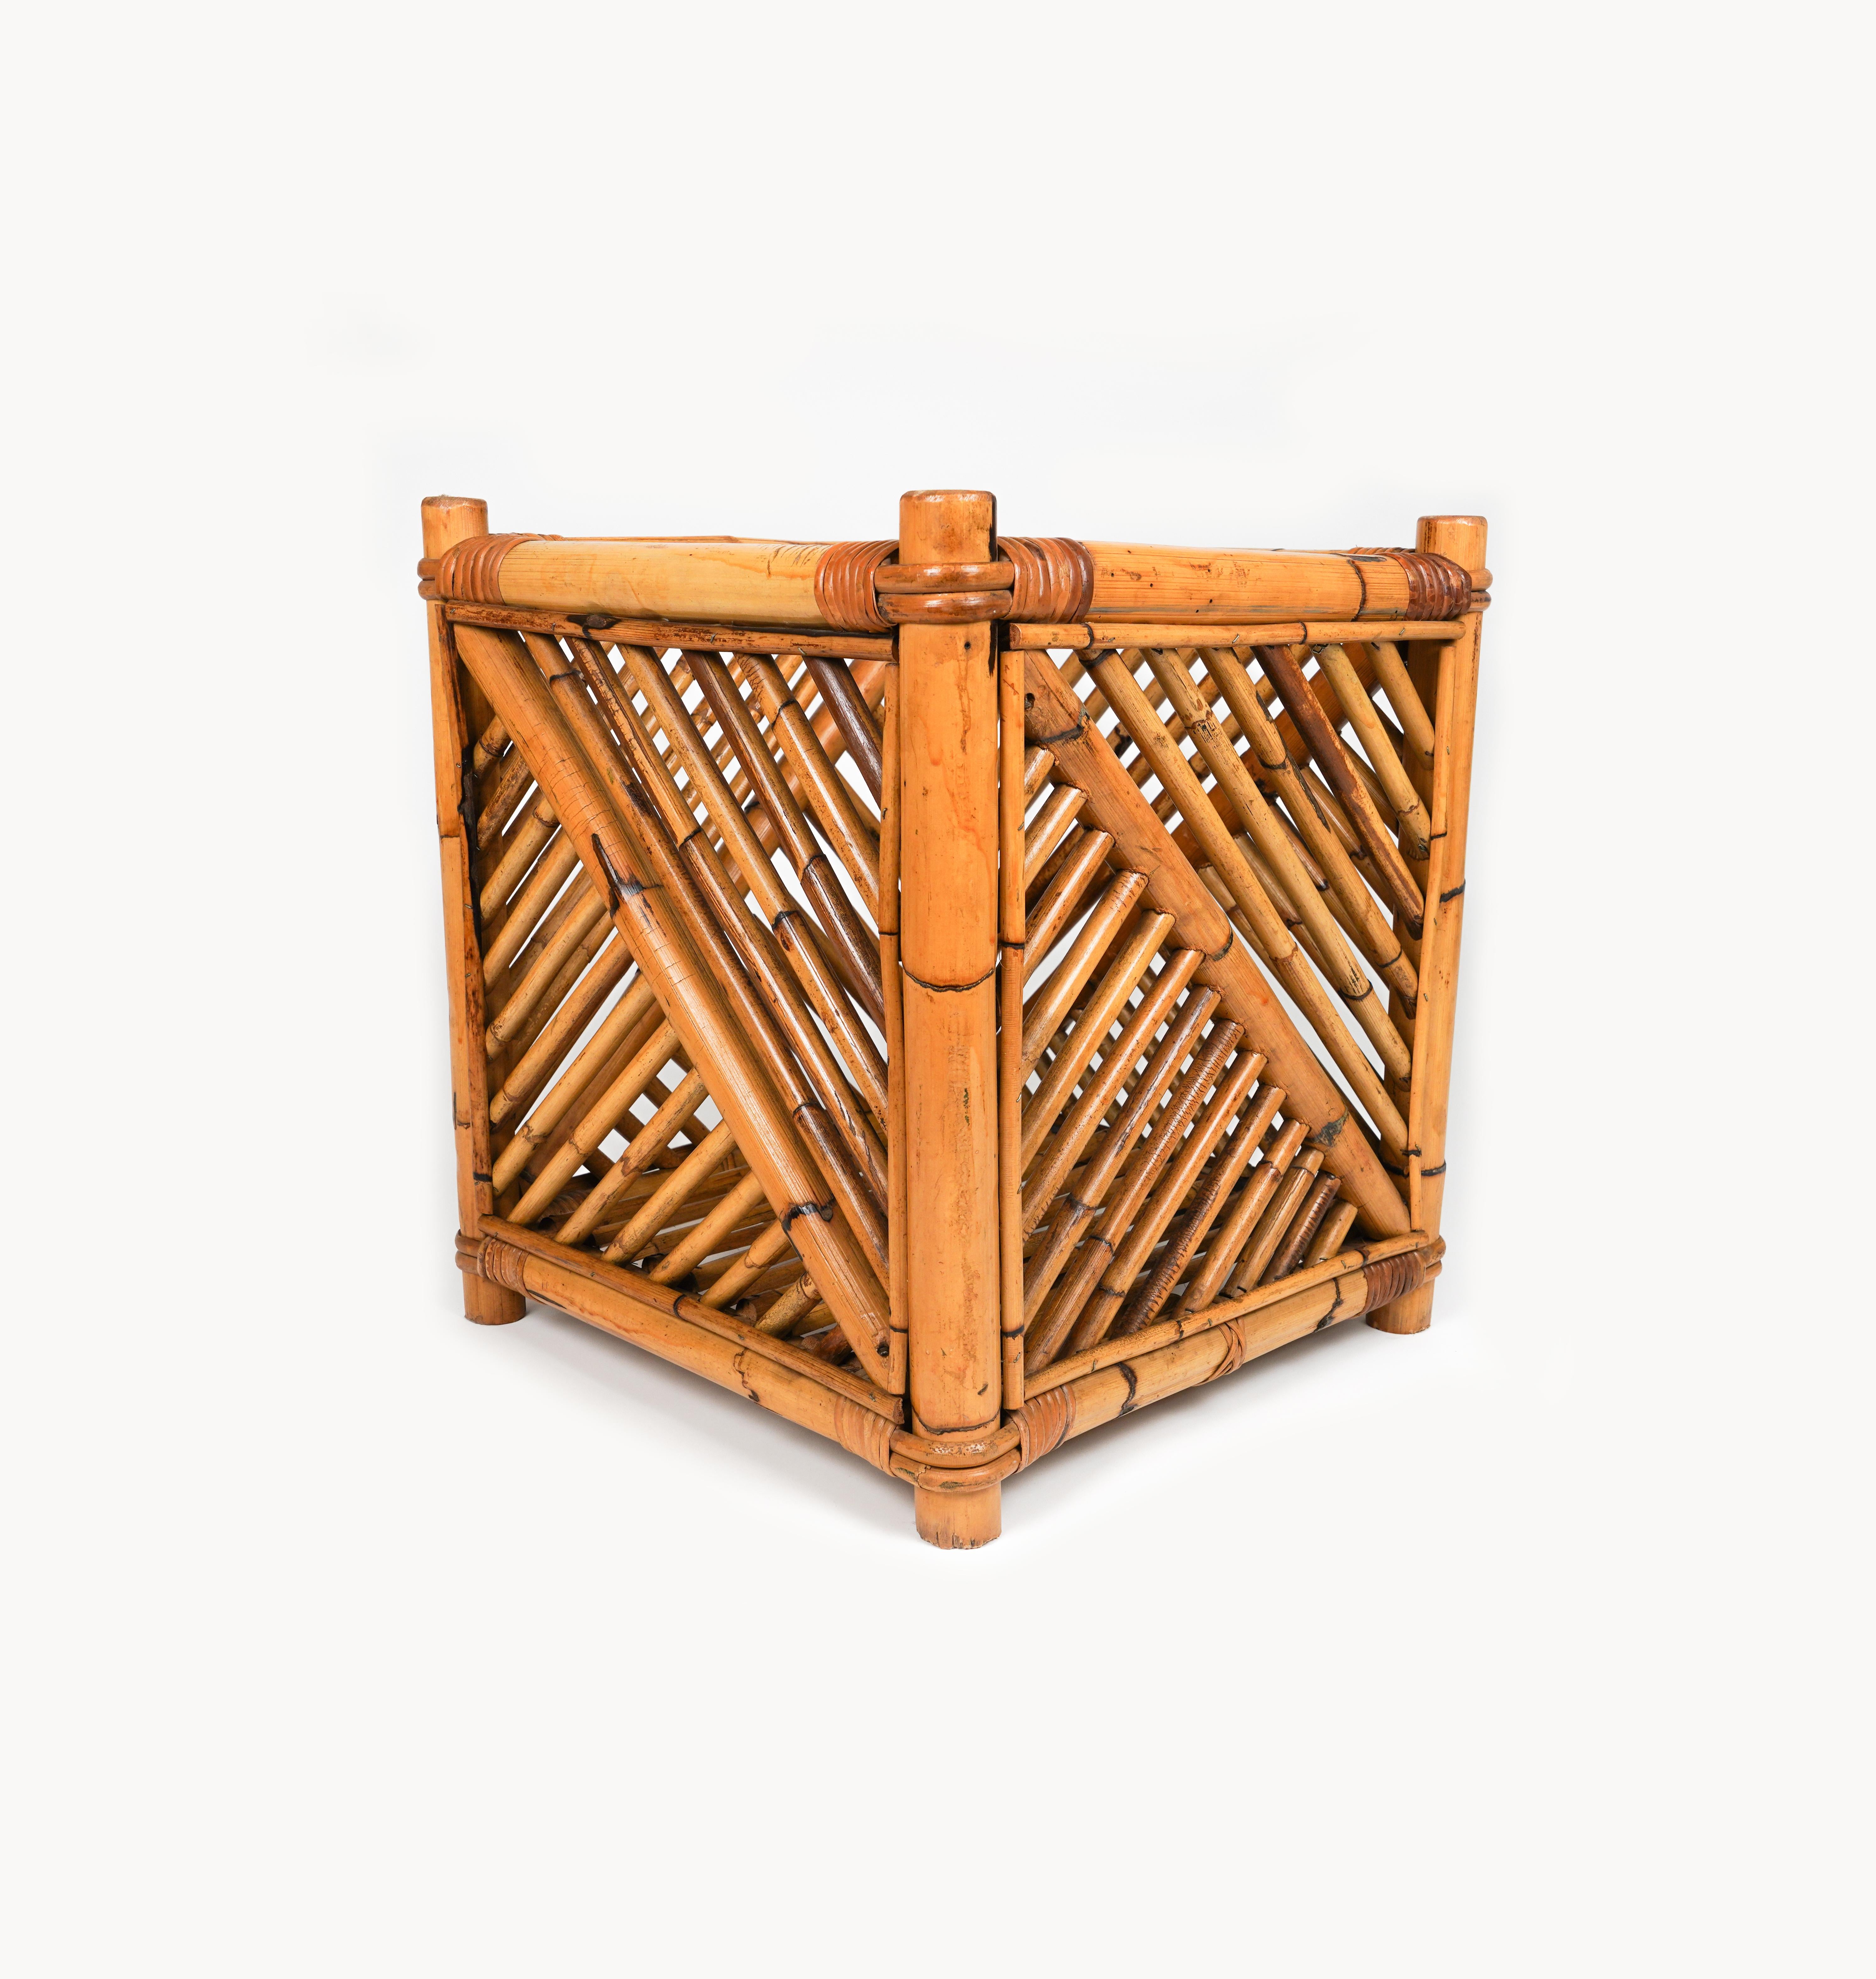 Italian Rattan and Bamboo Plant Holder or Basket by Vivai Del Sud, Italy 1970s For Sale